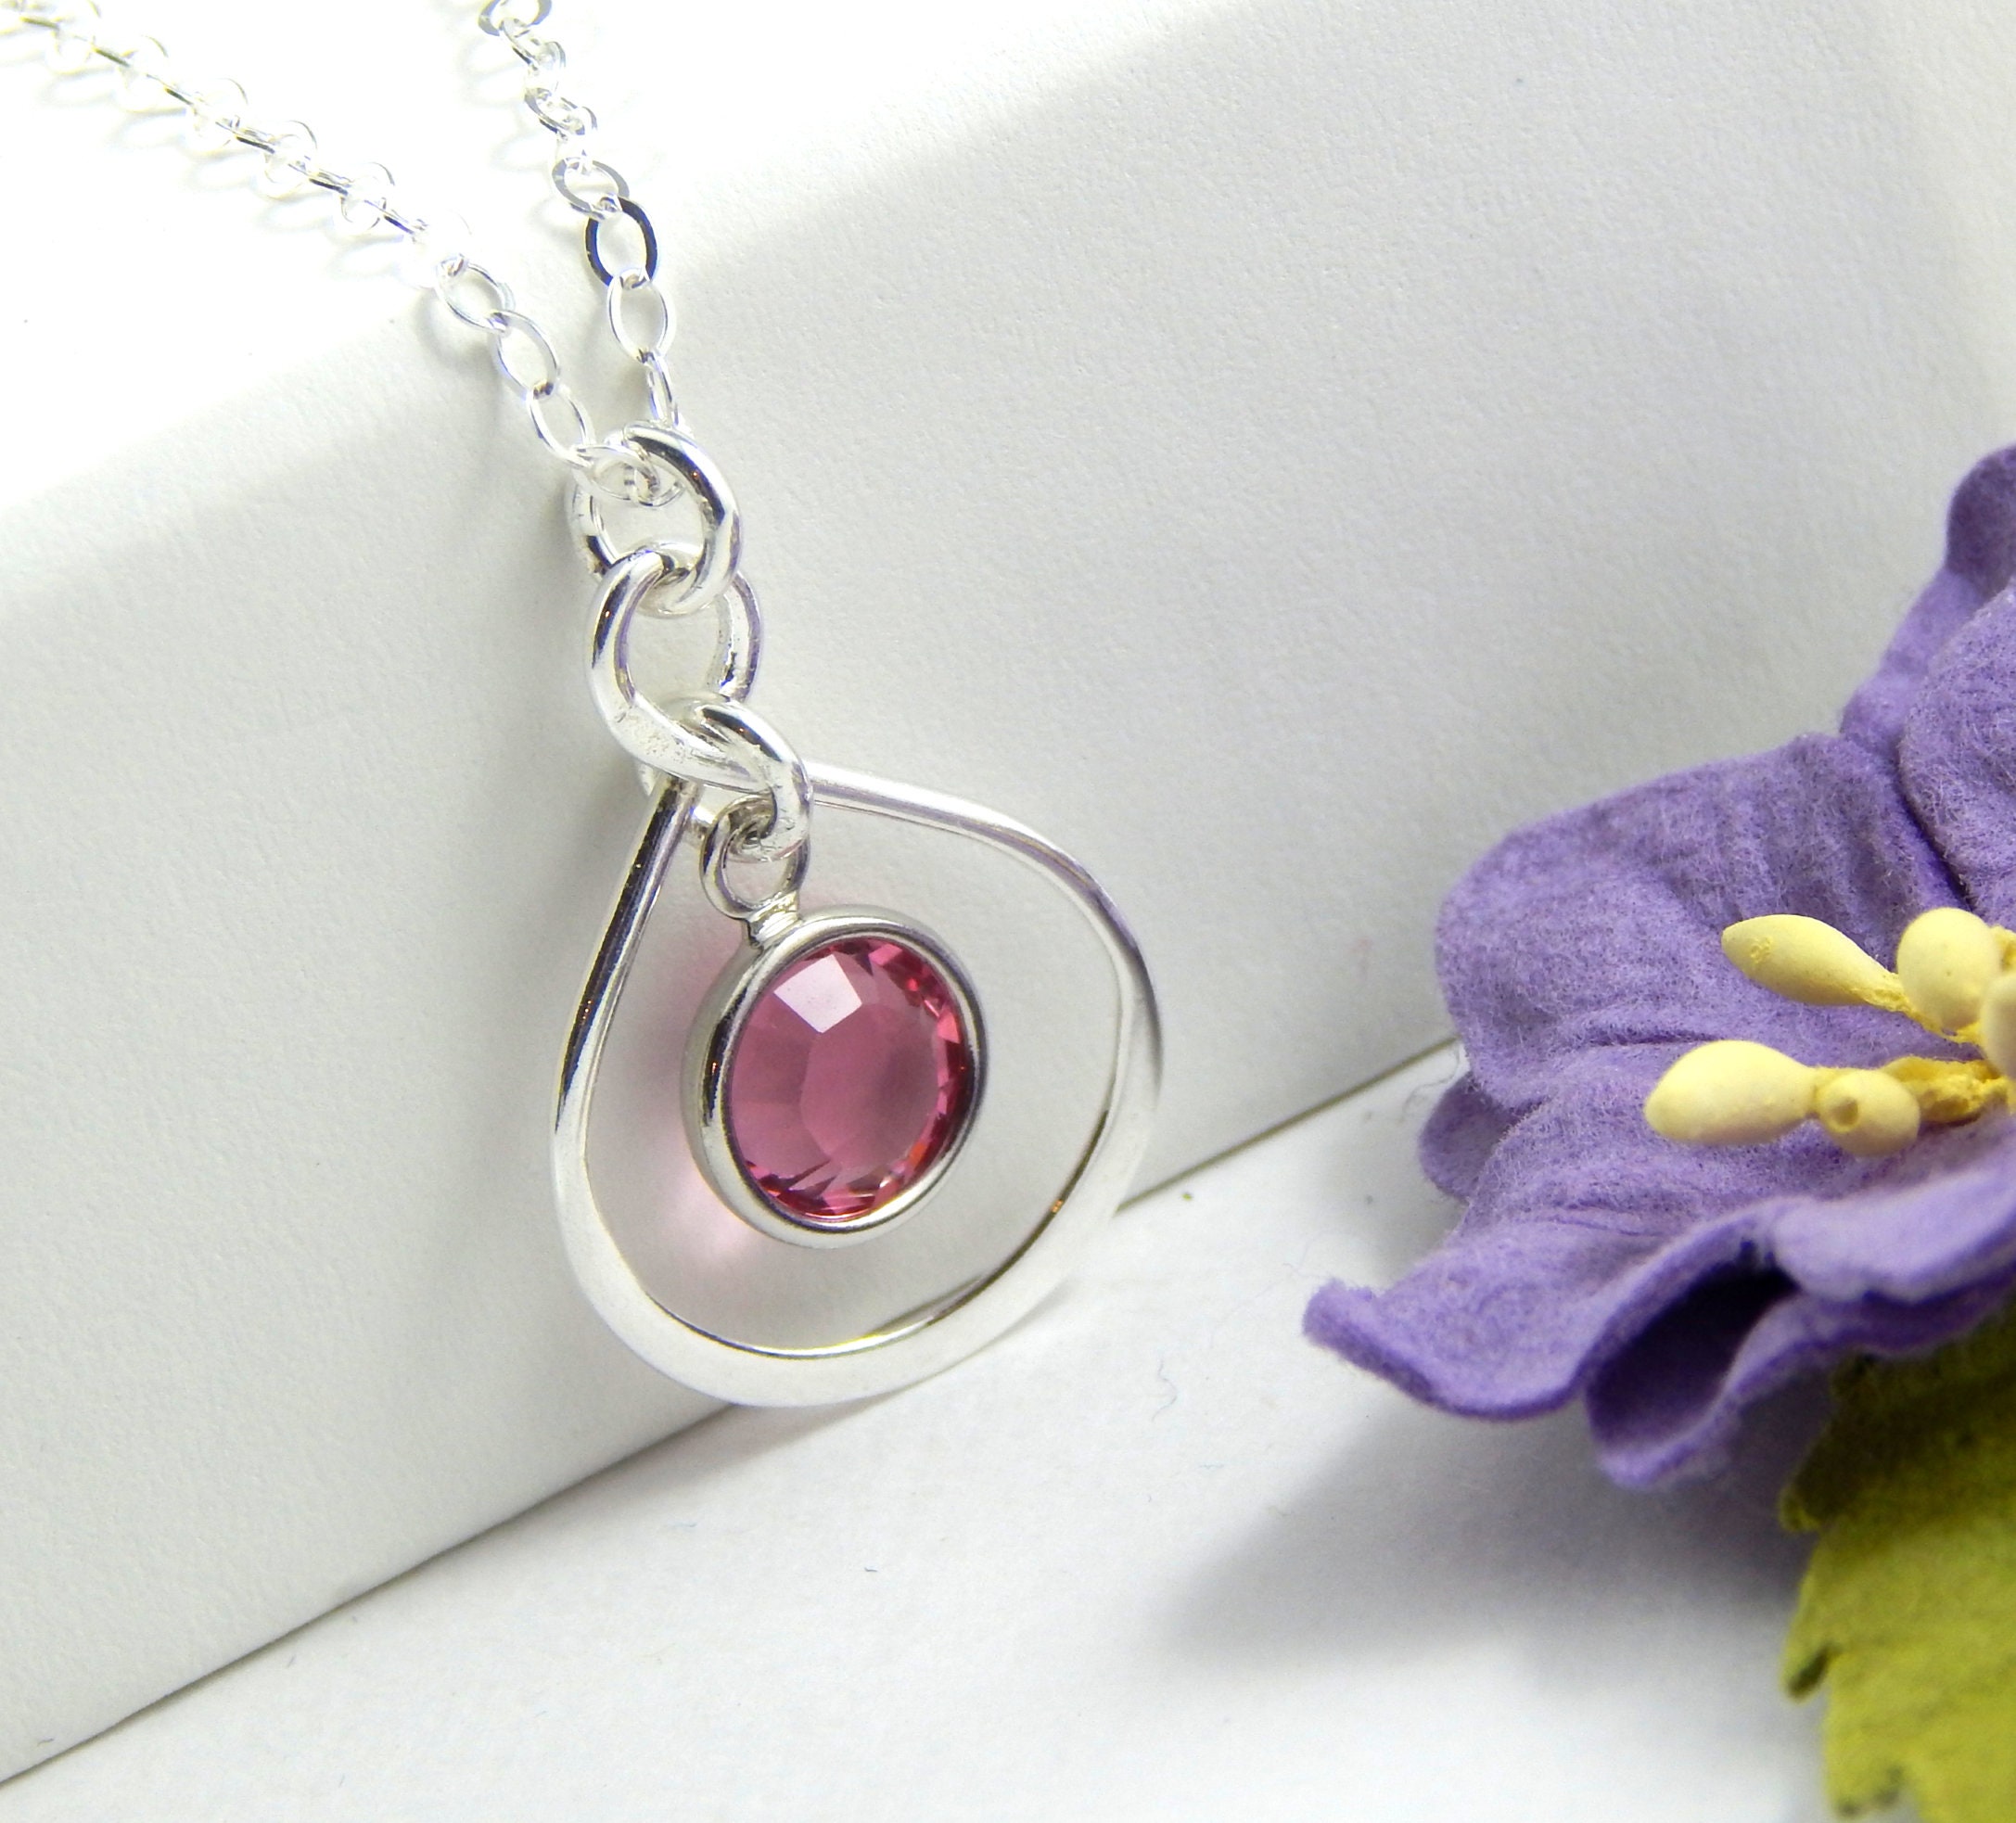 Birthday Gifts October Birthstone Pink Tourmaline Necklace for Mom Wife Love Infinity Necklace Citrine Blue Sapphire Peridot and More Stones Sterling Silver Jewelry 